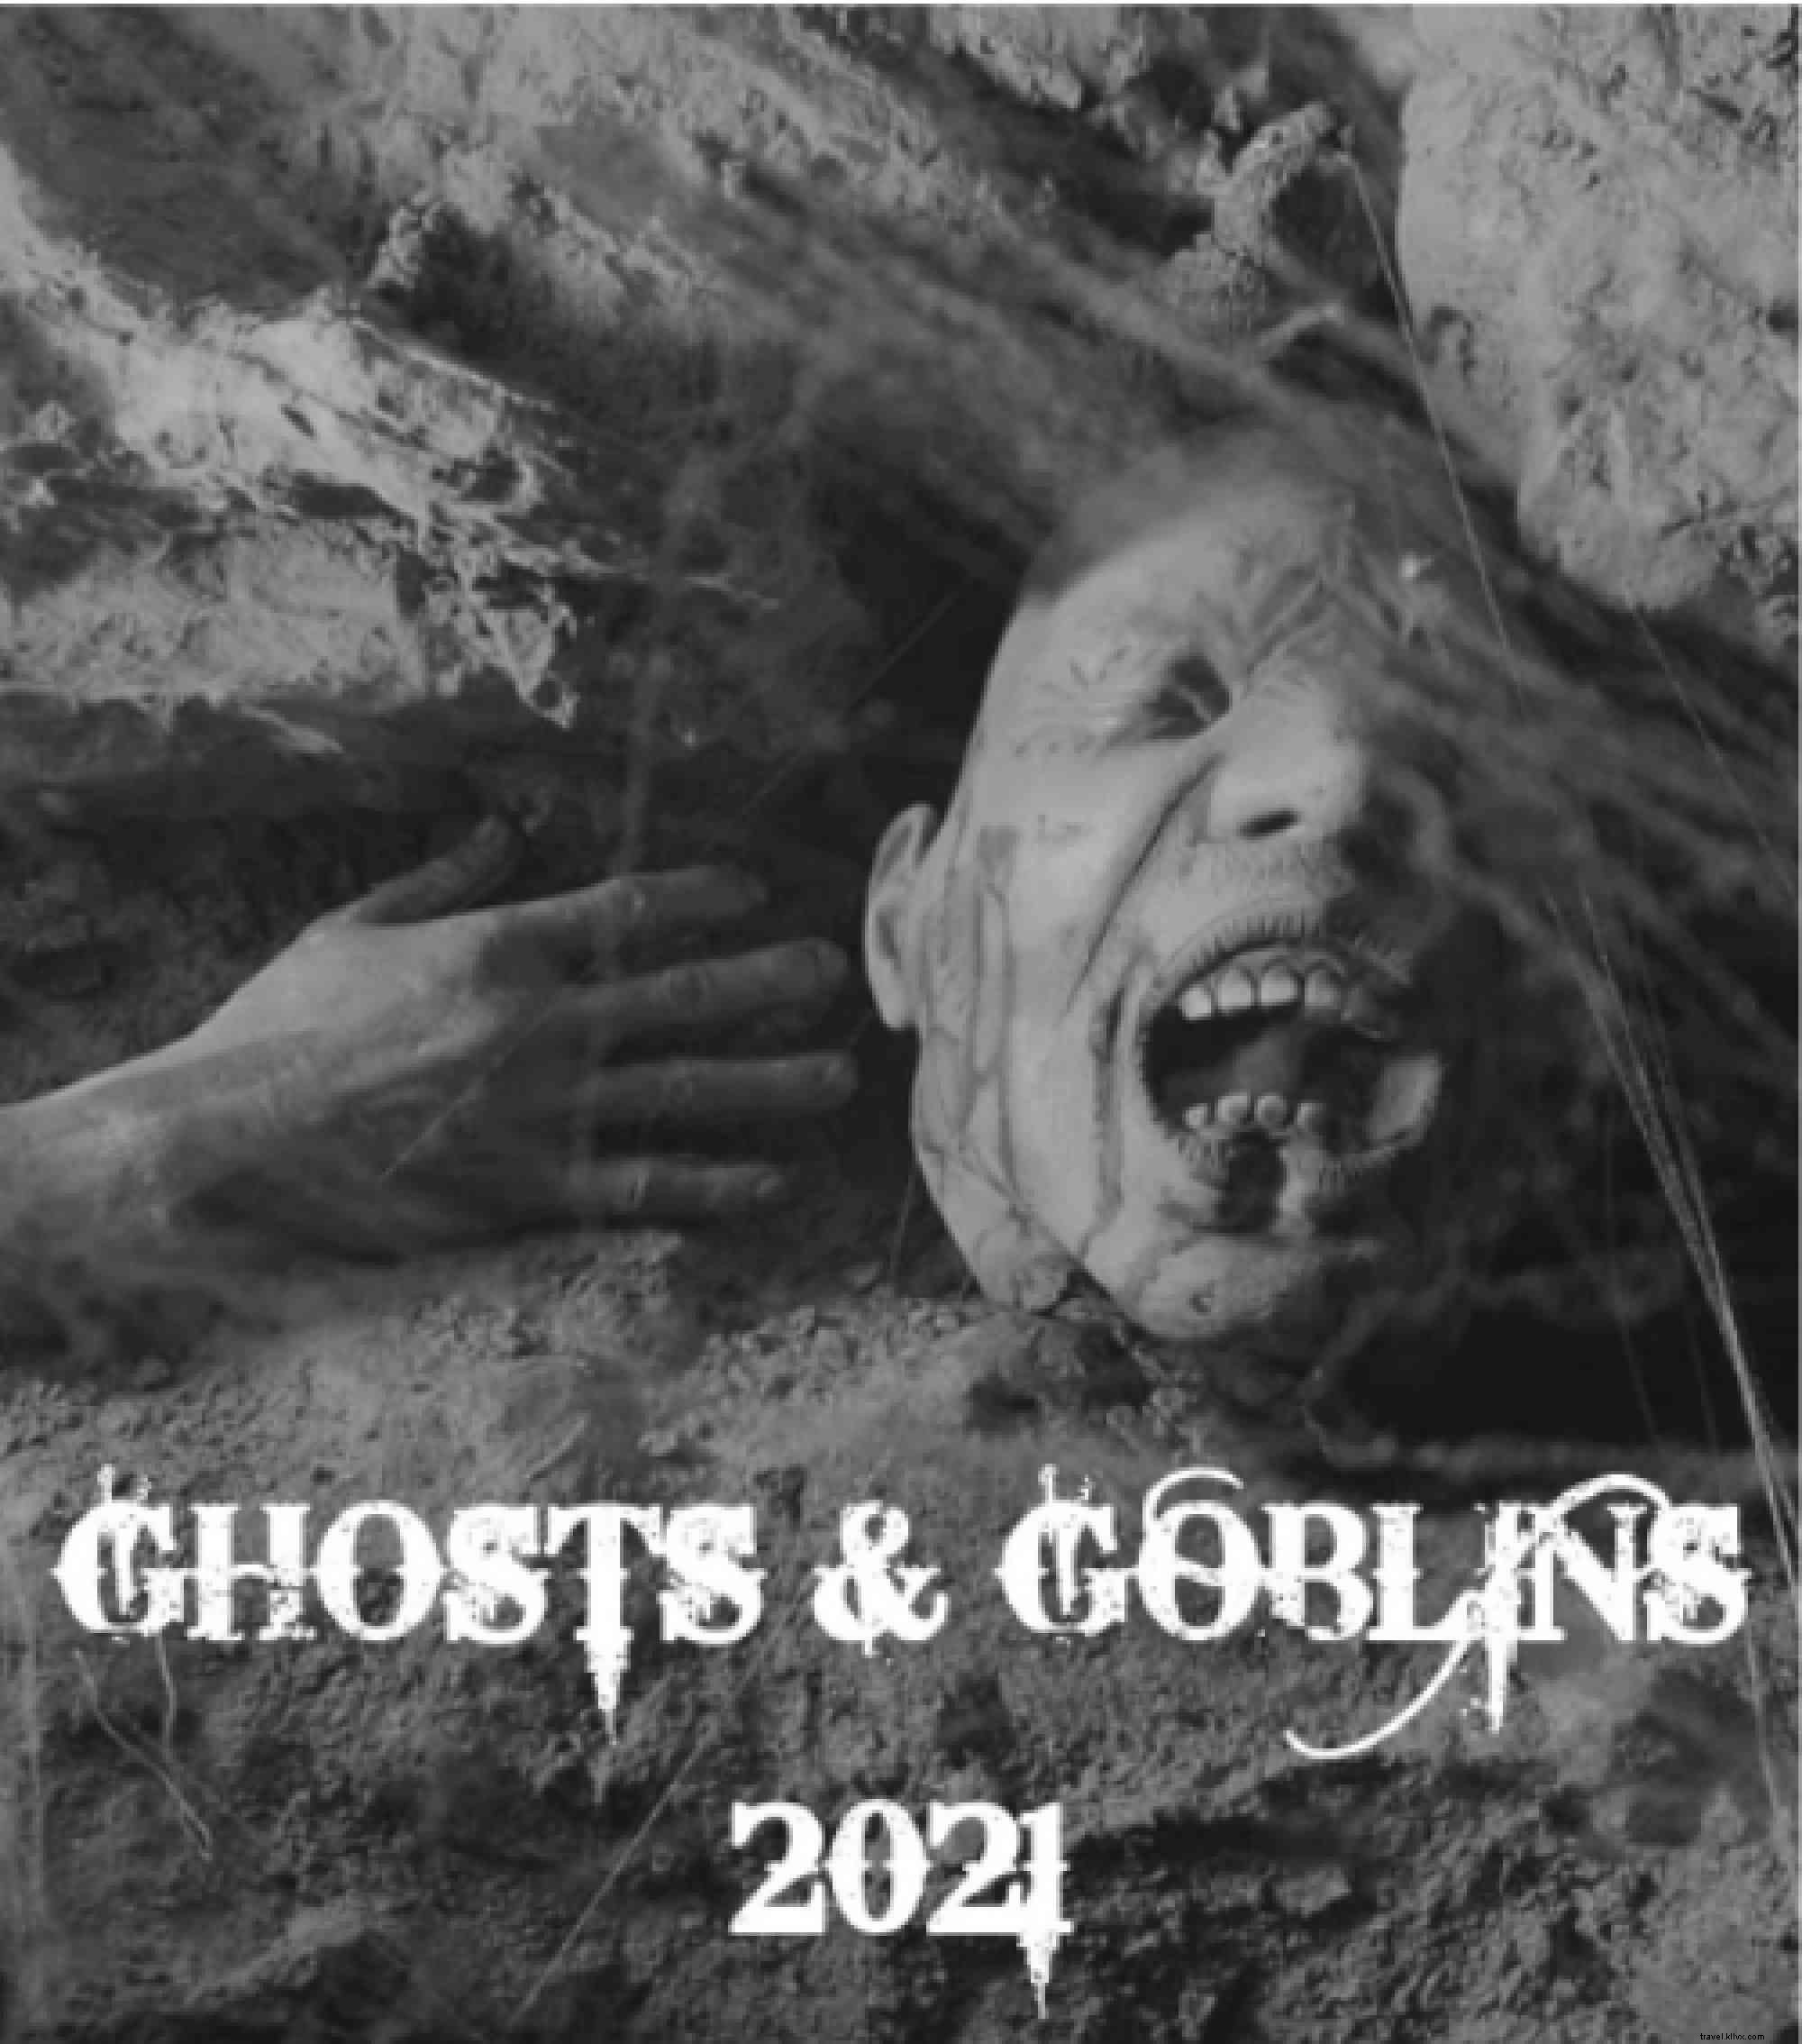 incoln Caverns 38th Annual Ghosts and Goblin 2021 